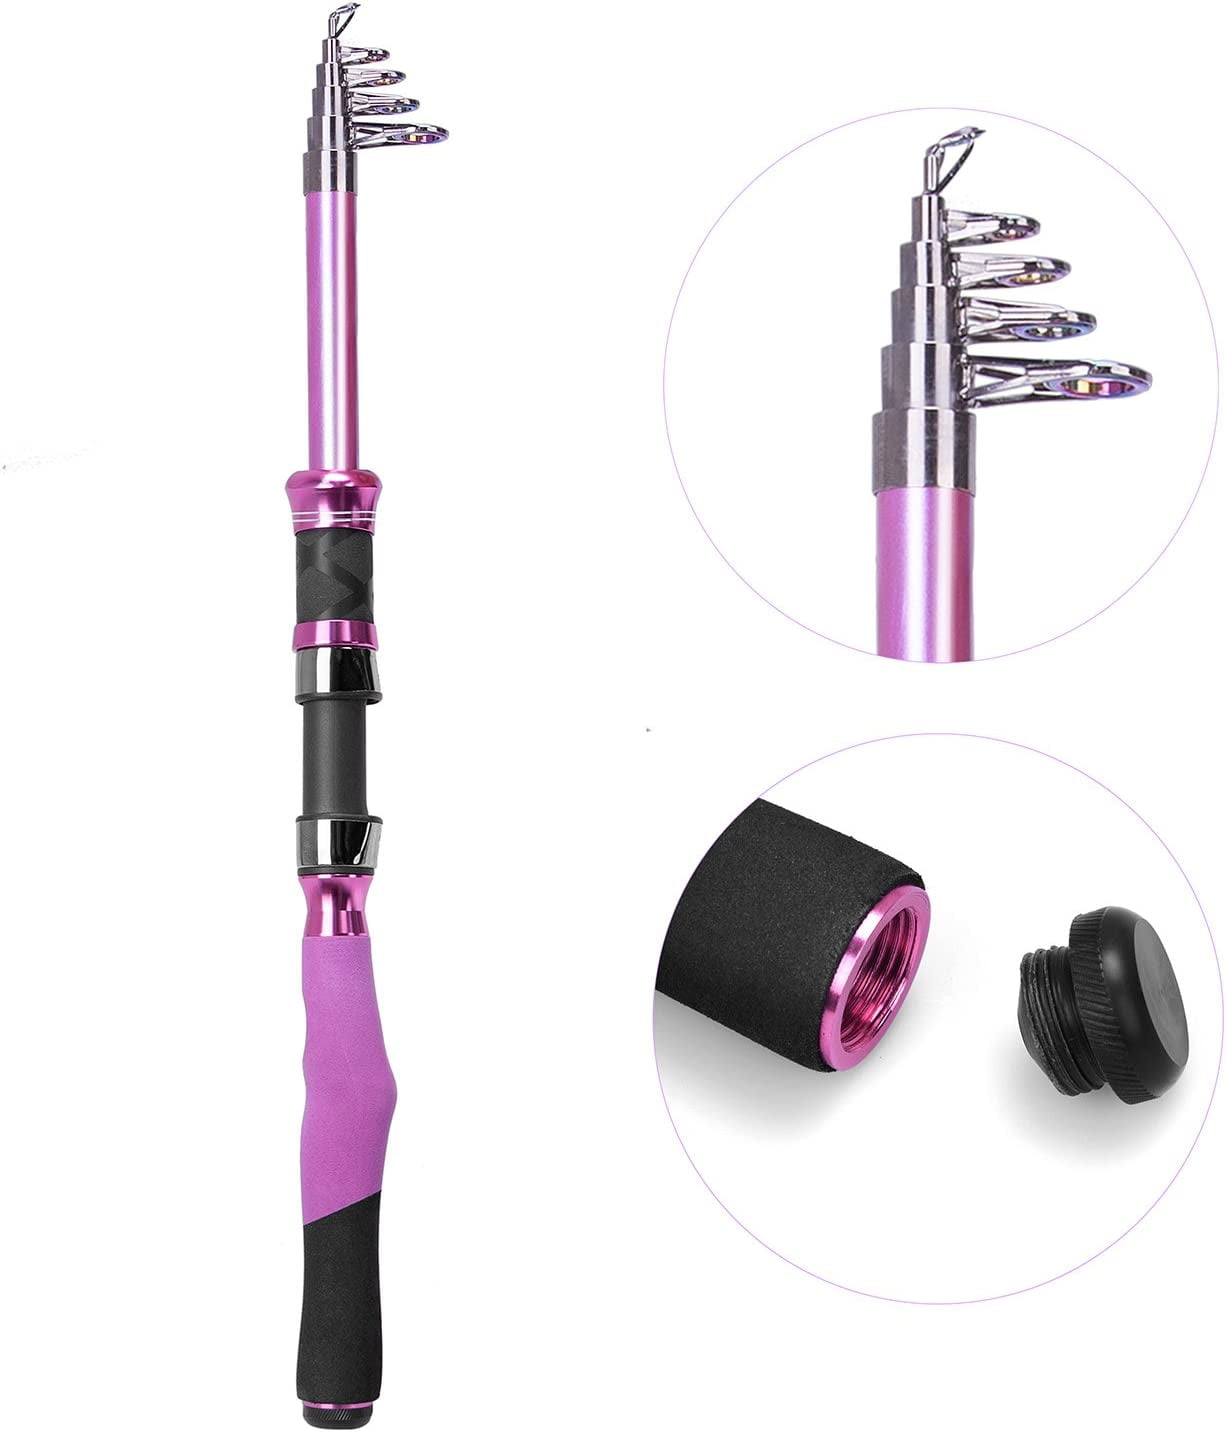 PLUSINNO Spinning Rod and Reel Combos - fishingnew